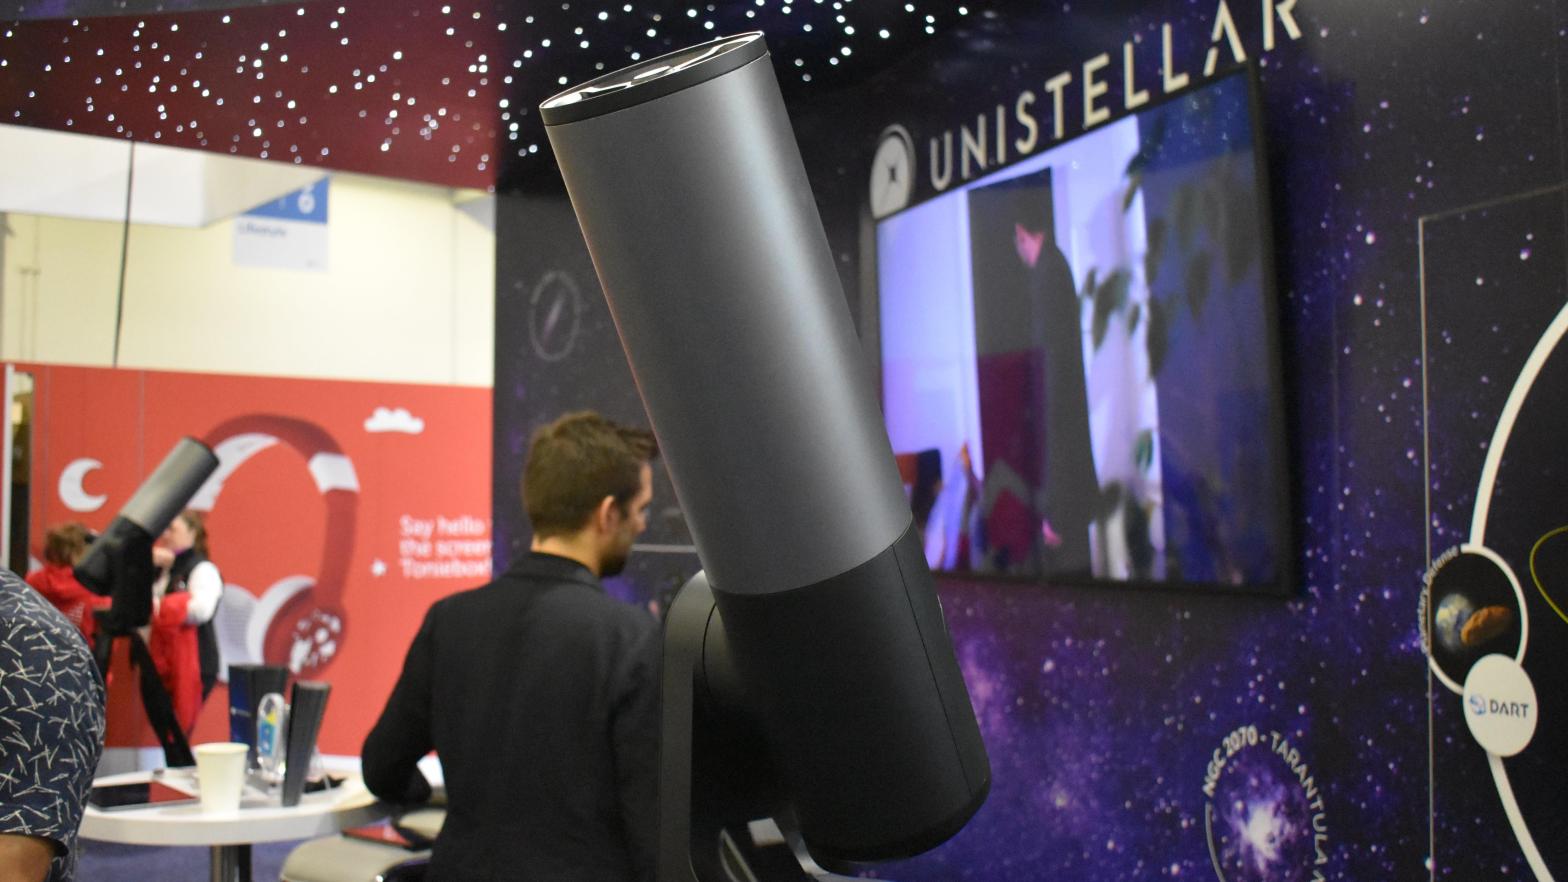 The Unistellar eQuinox 2 boasts light pollution reduction technology to give people back the night sky. (Photo: Kyle Barr/Gizmodo)